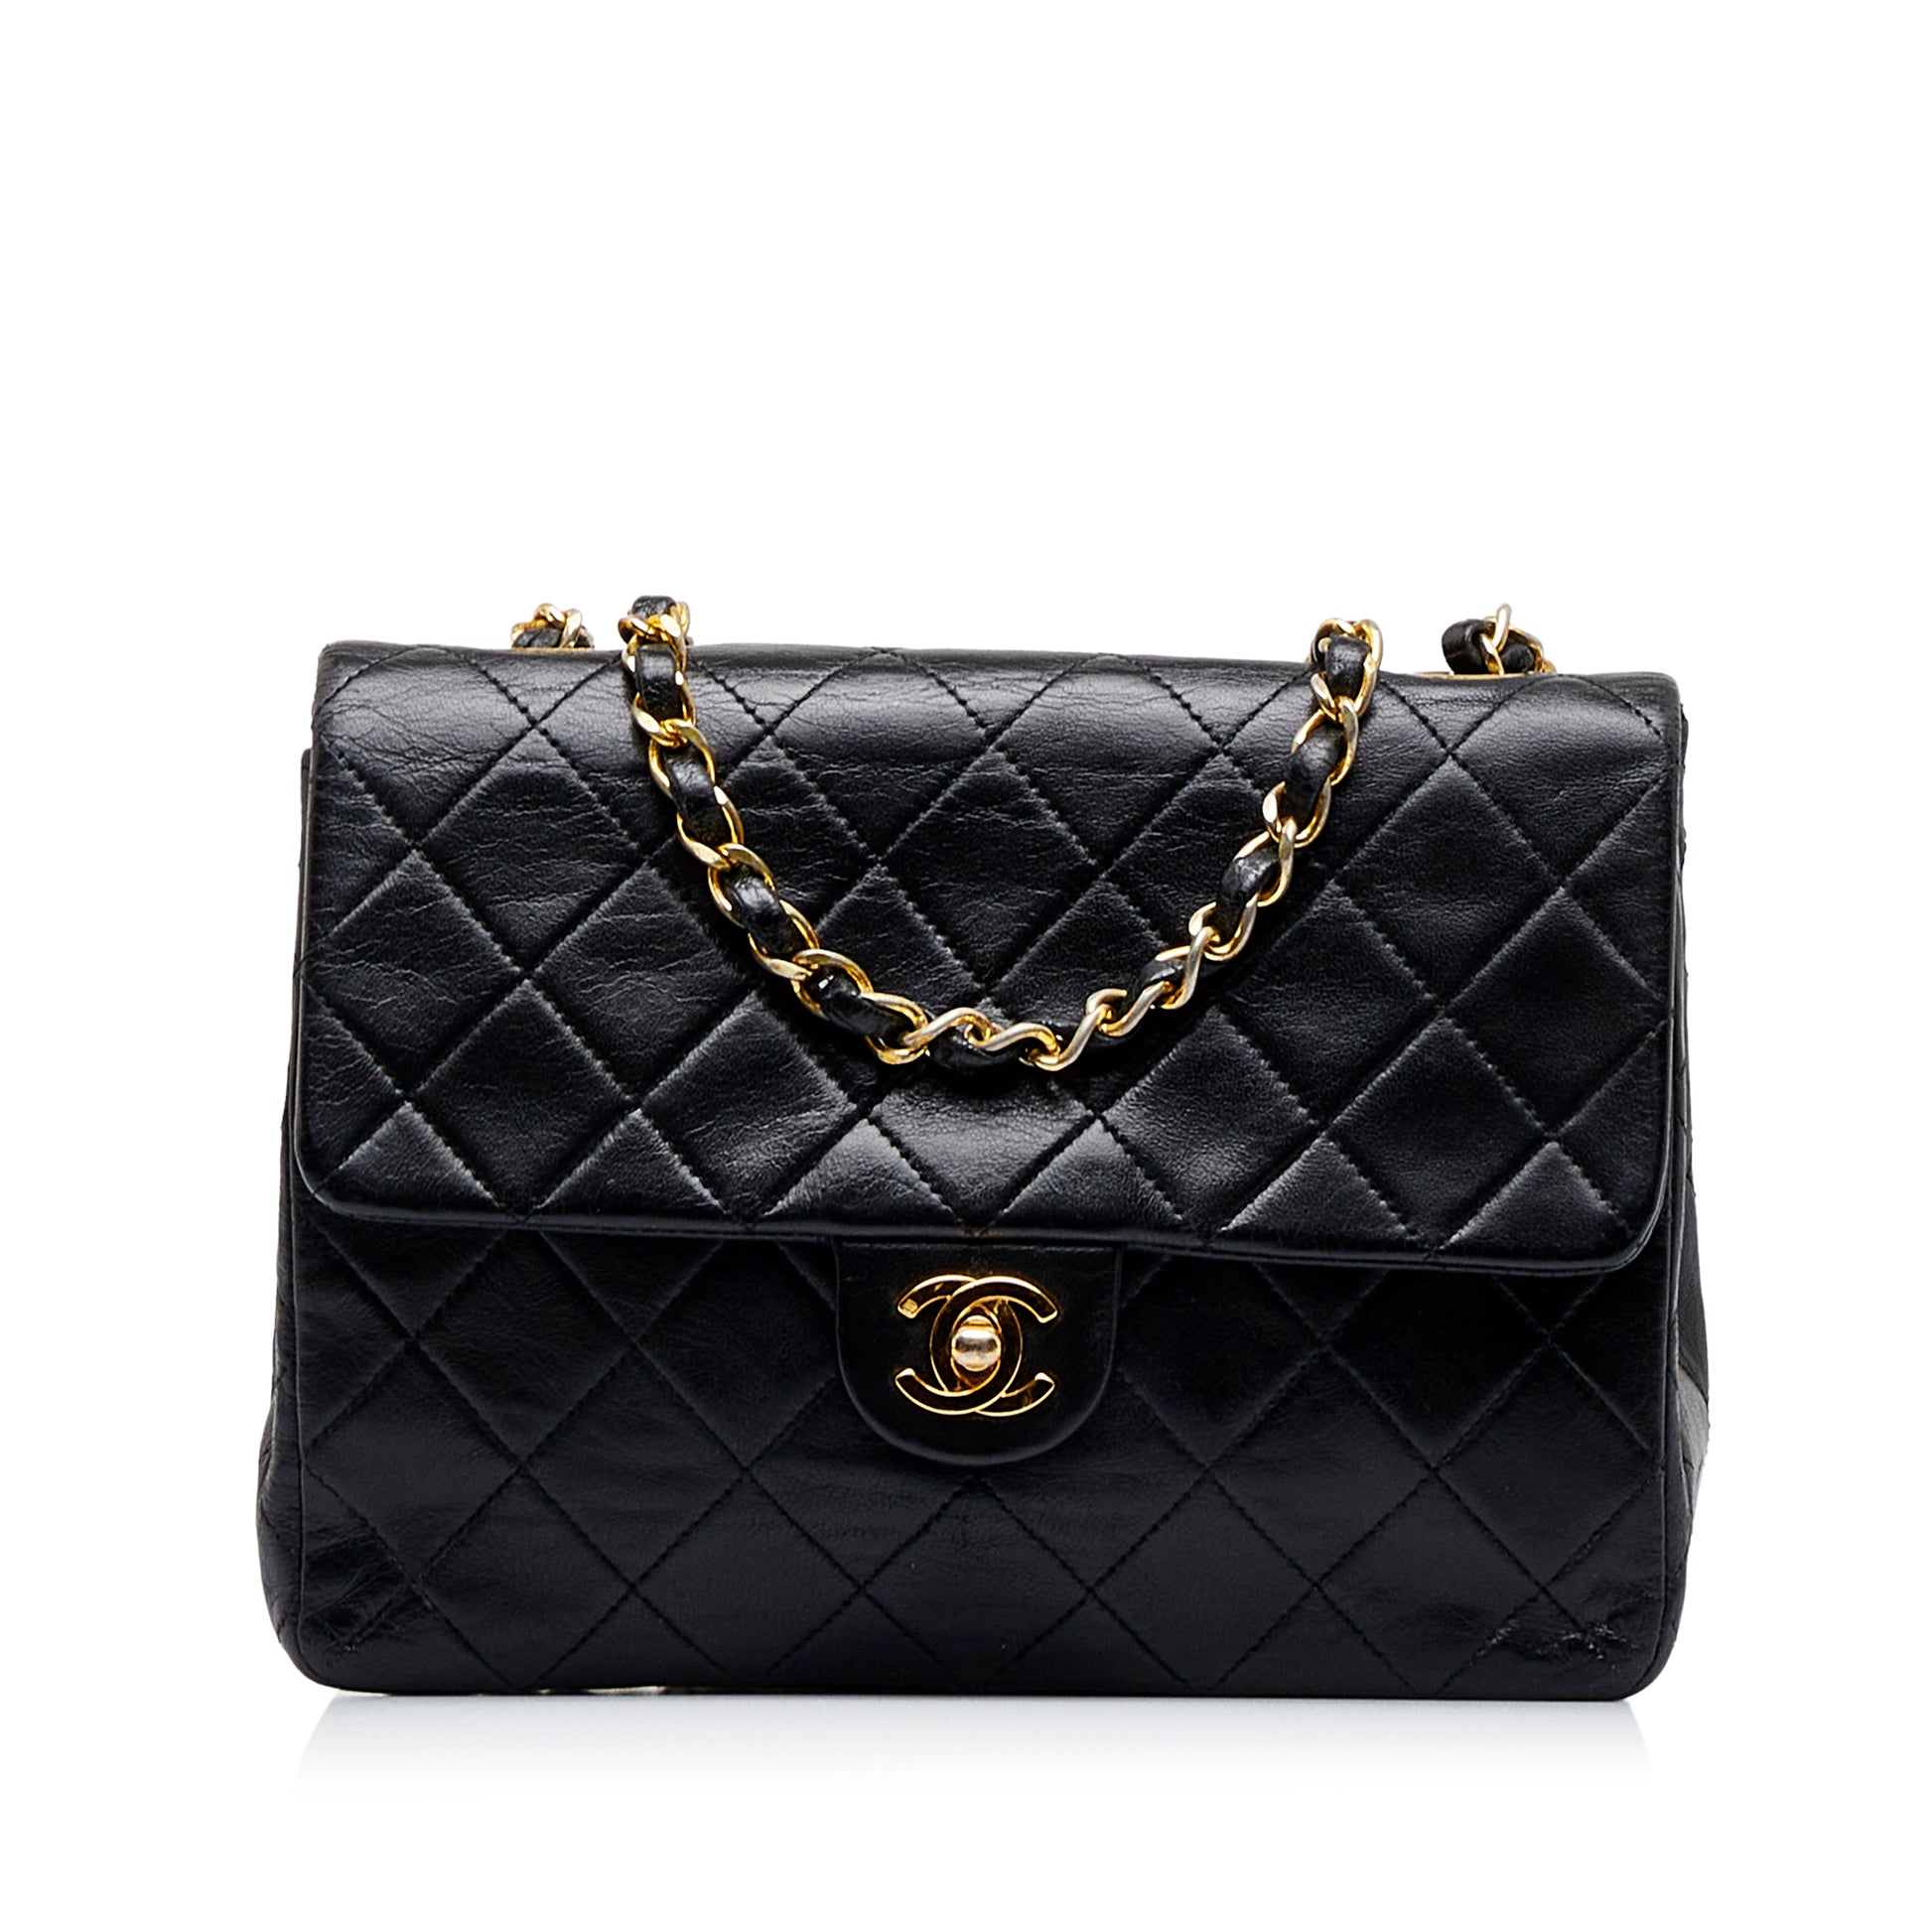 CHANEL CC BLACK LEATHER CLASSIC FLAP BACKPACK SLING BAG